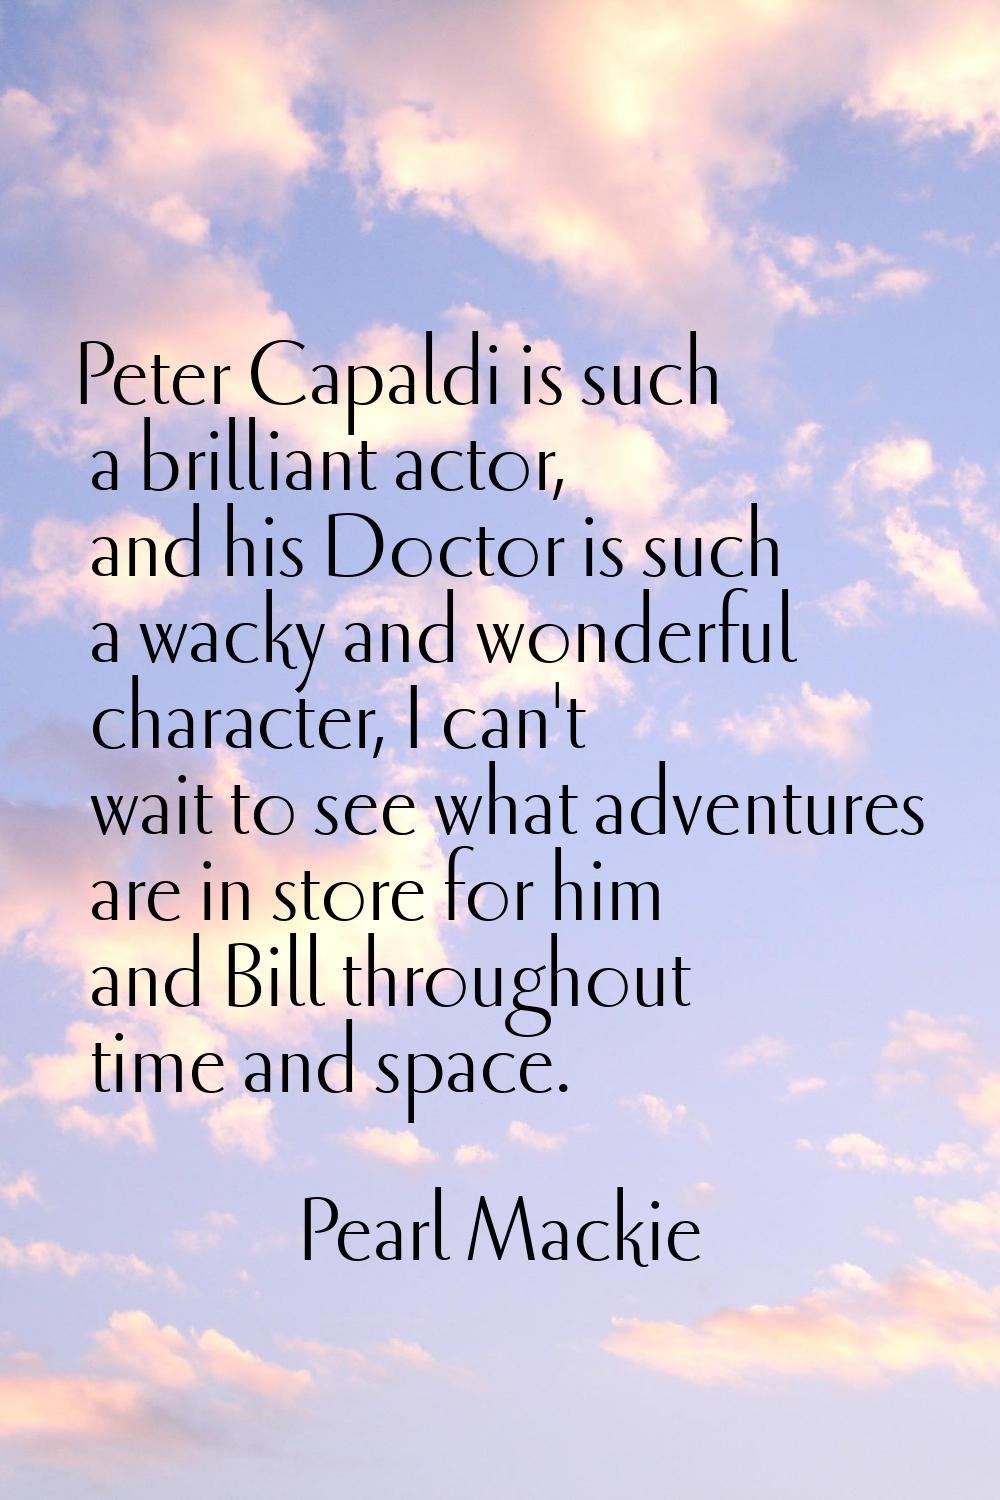 Peter Capaldi is such a brilliant actor, and his Doctor is such a wacky and wonderful character, I 